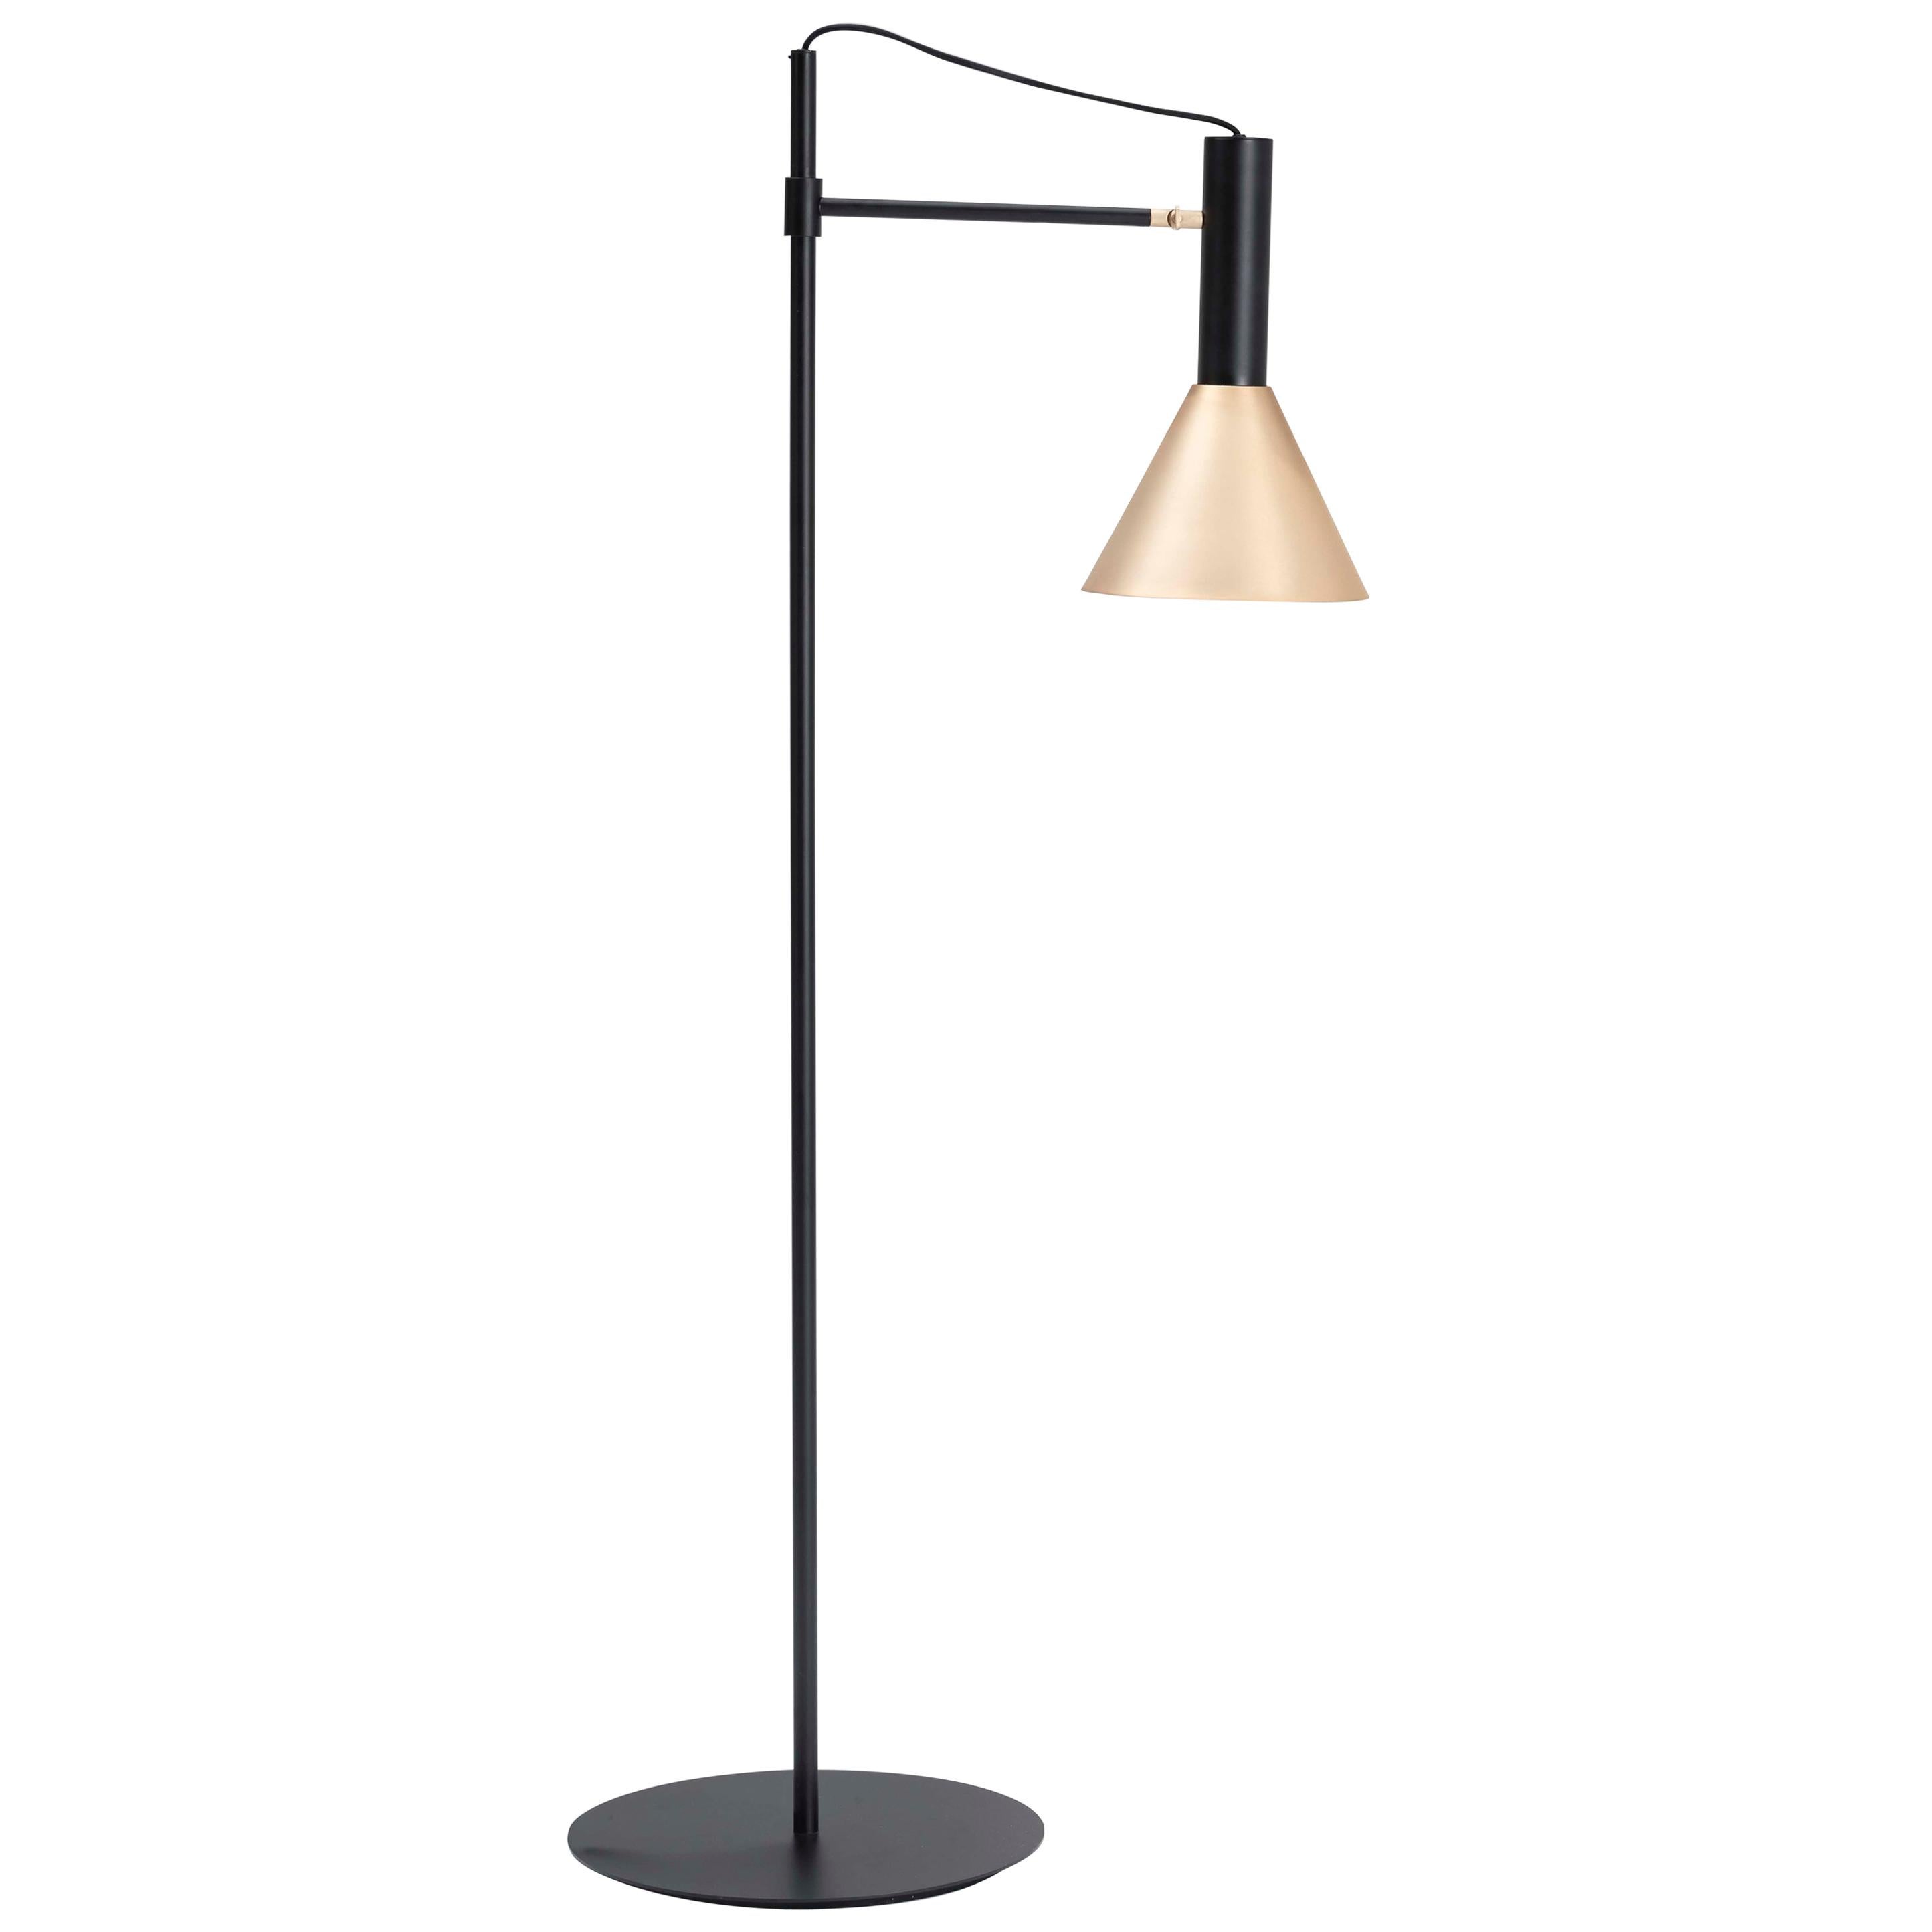 21st Century Created by William Pianta Sabeen Decor Floor Lamp Brushed